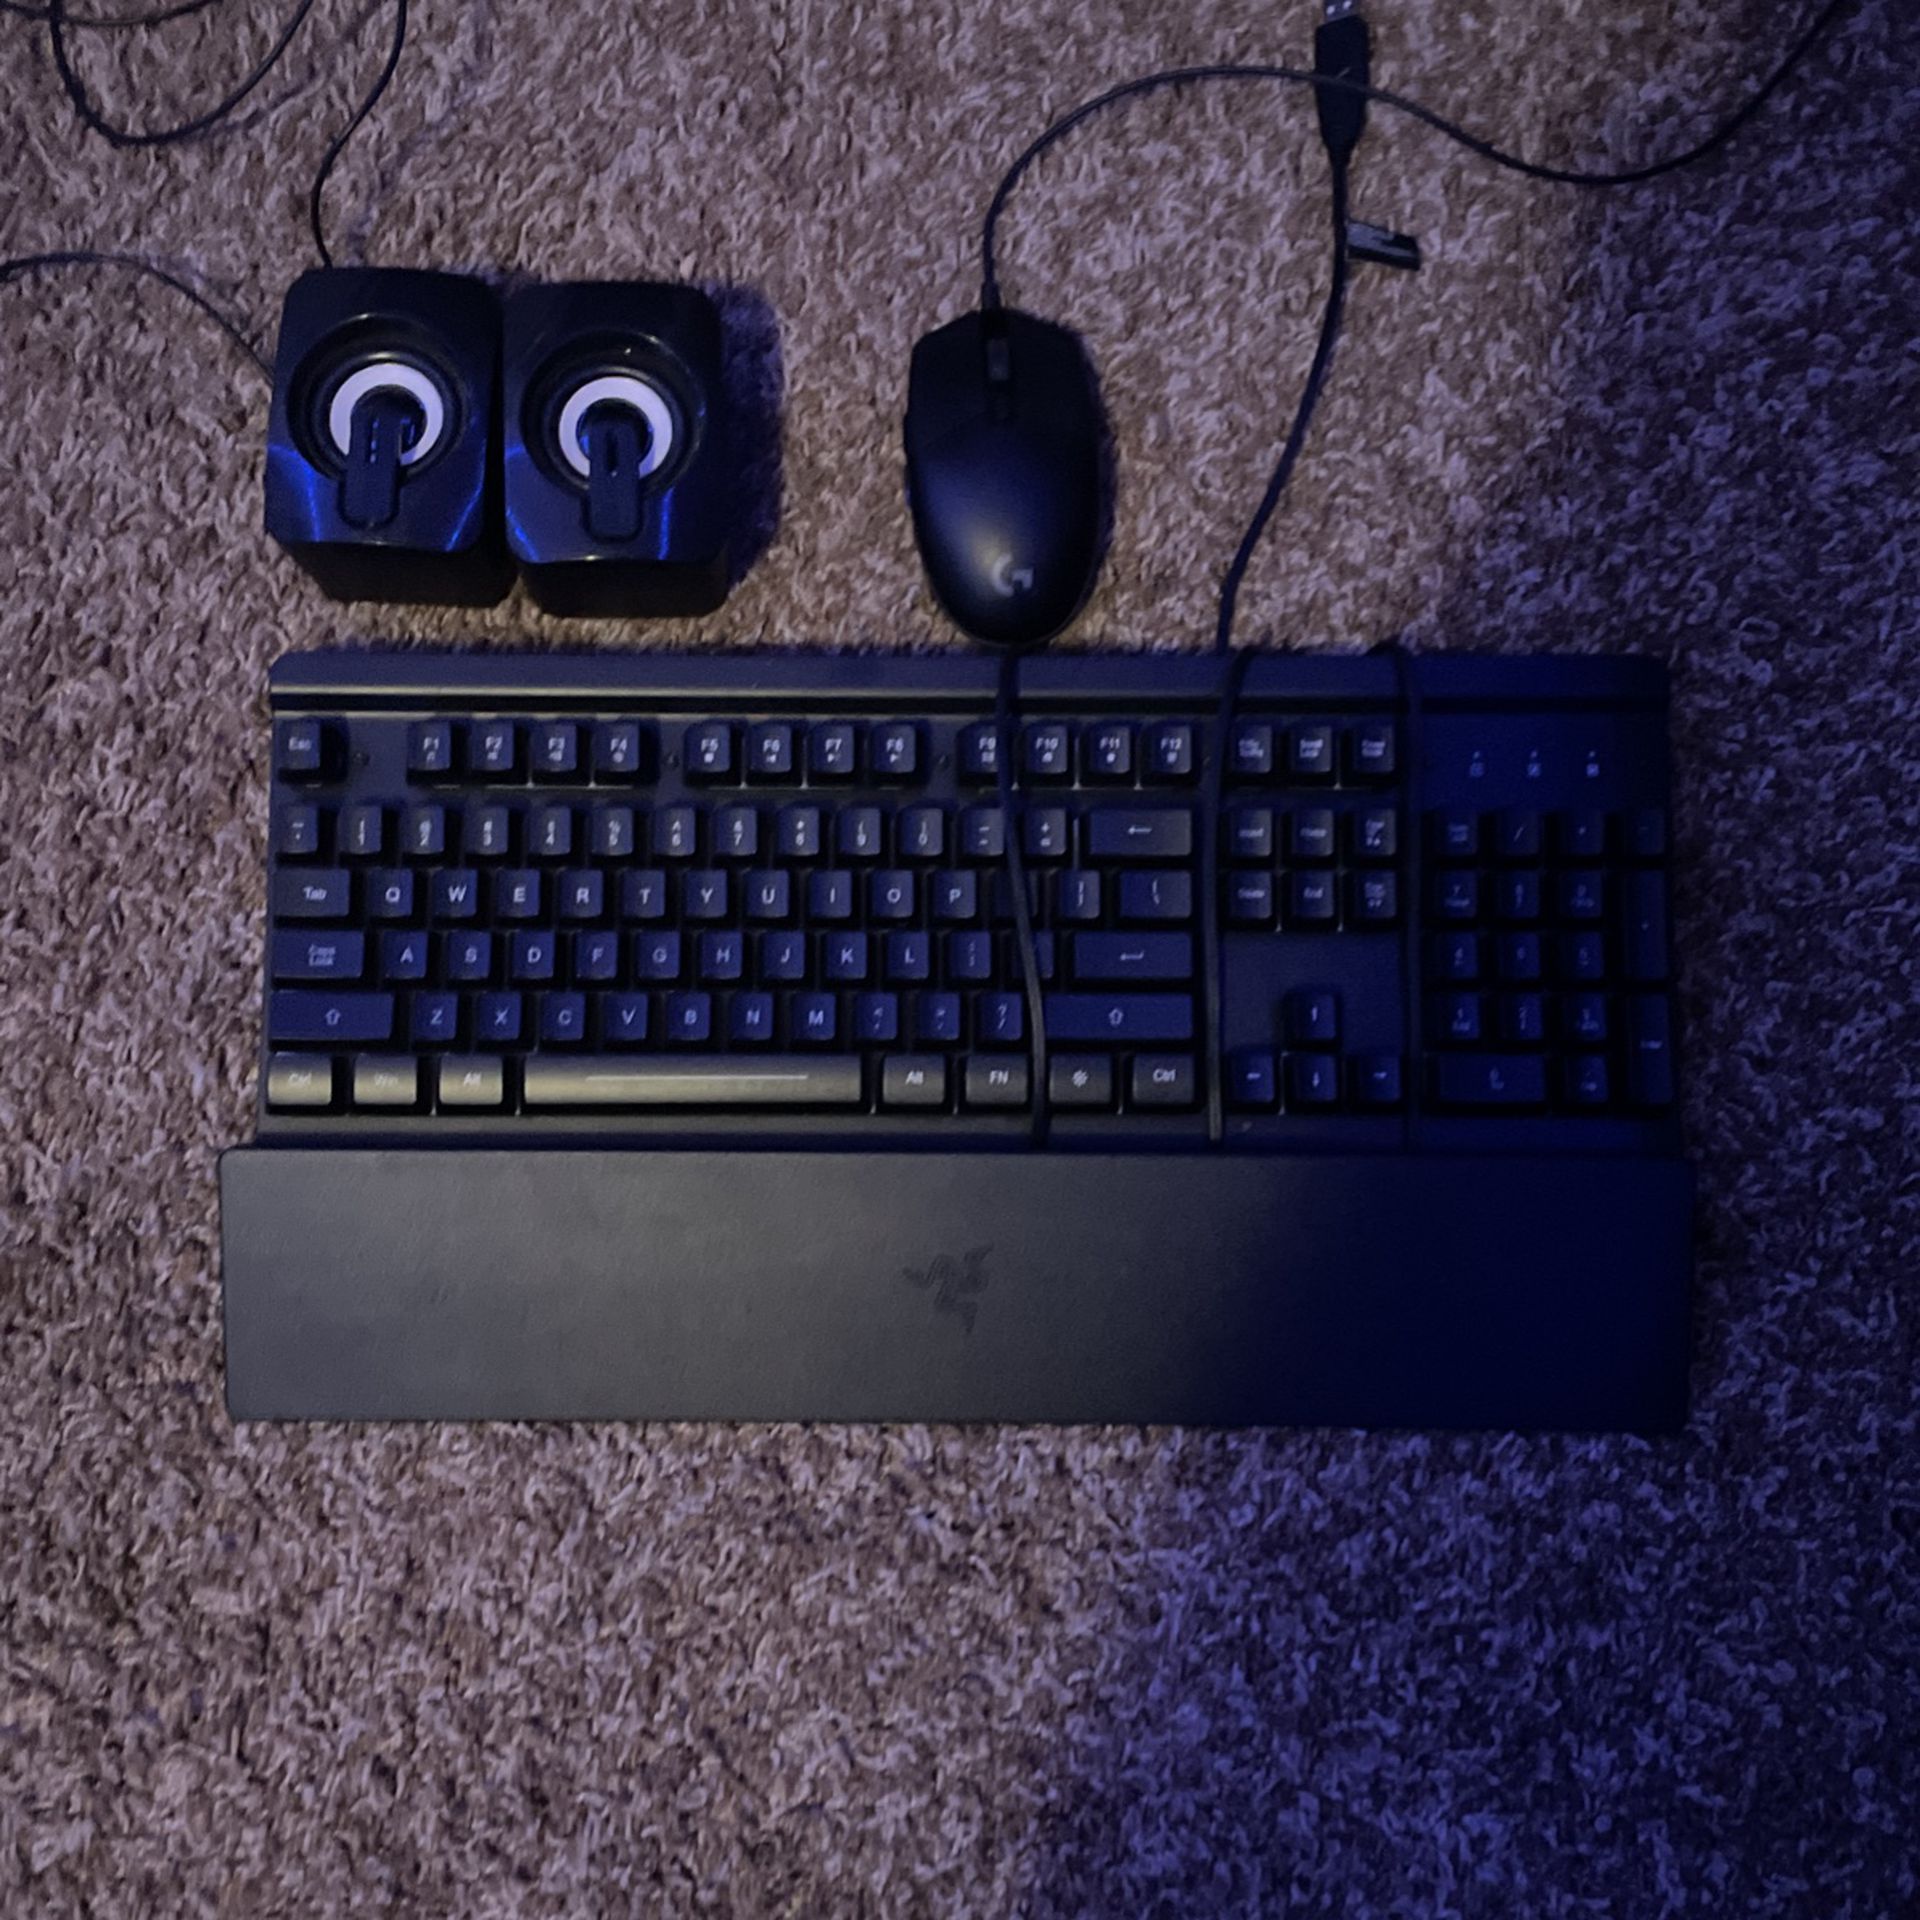 Full-Size Keyboard, Mouse With Side Buttons And Speakers All Have Rgb